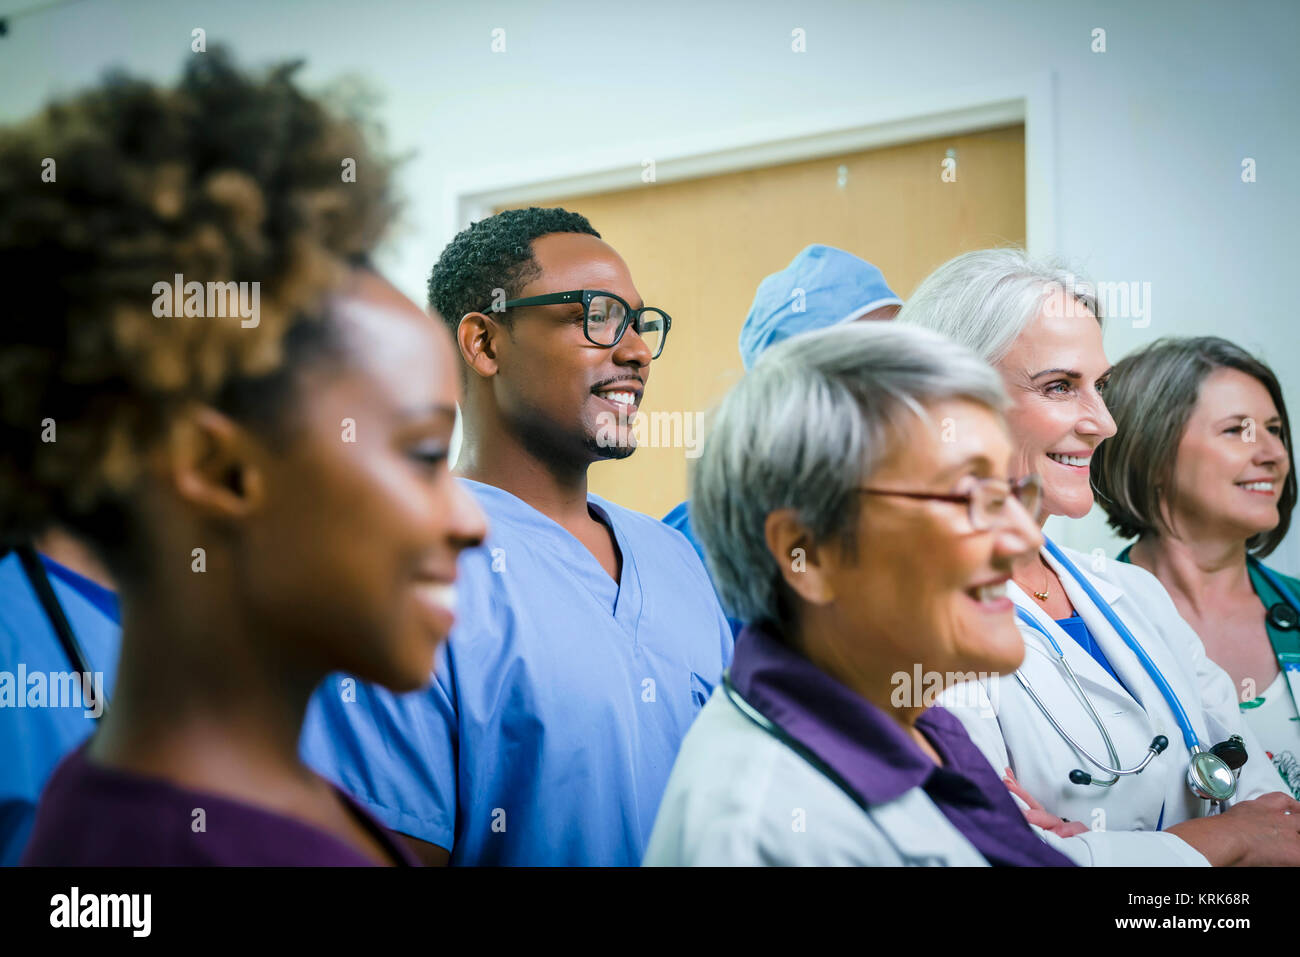 Portrait of smiling medical team Stock Photo